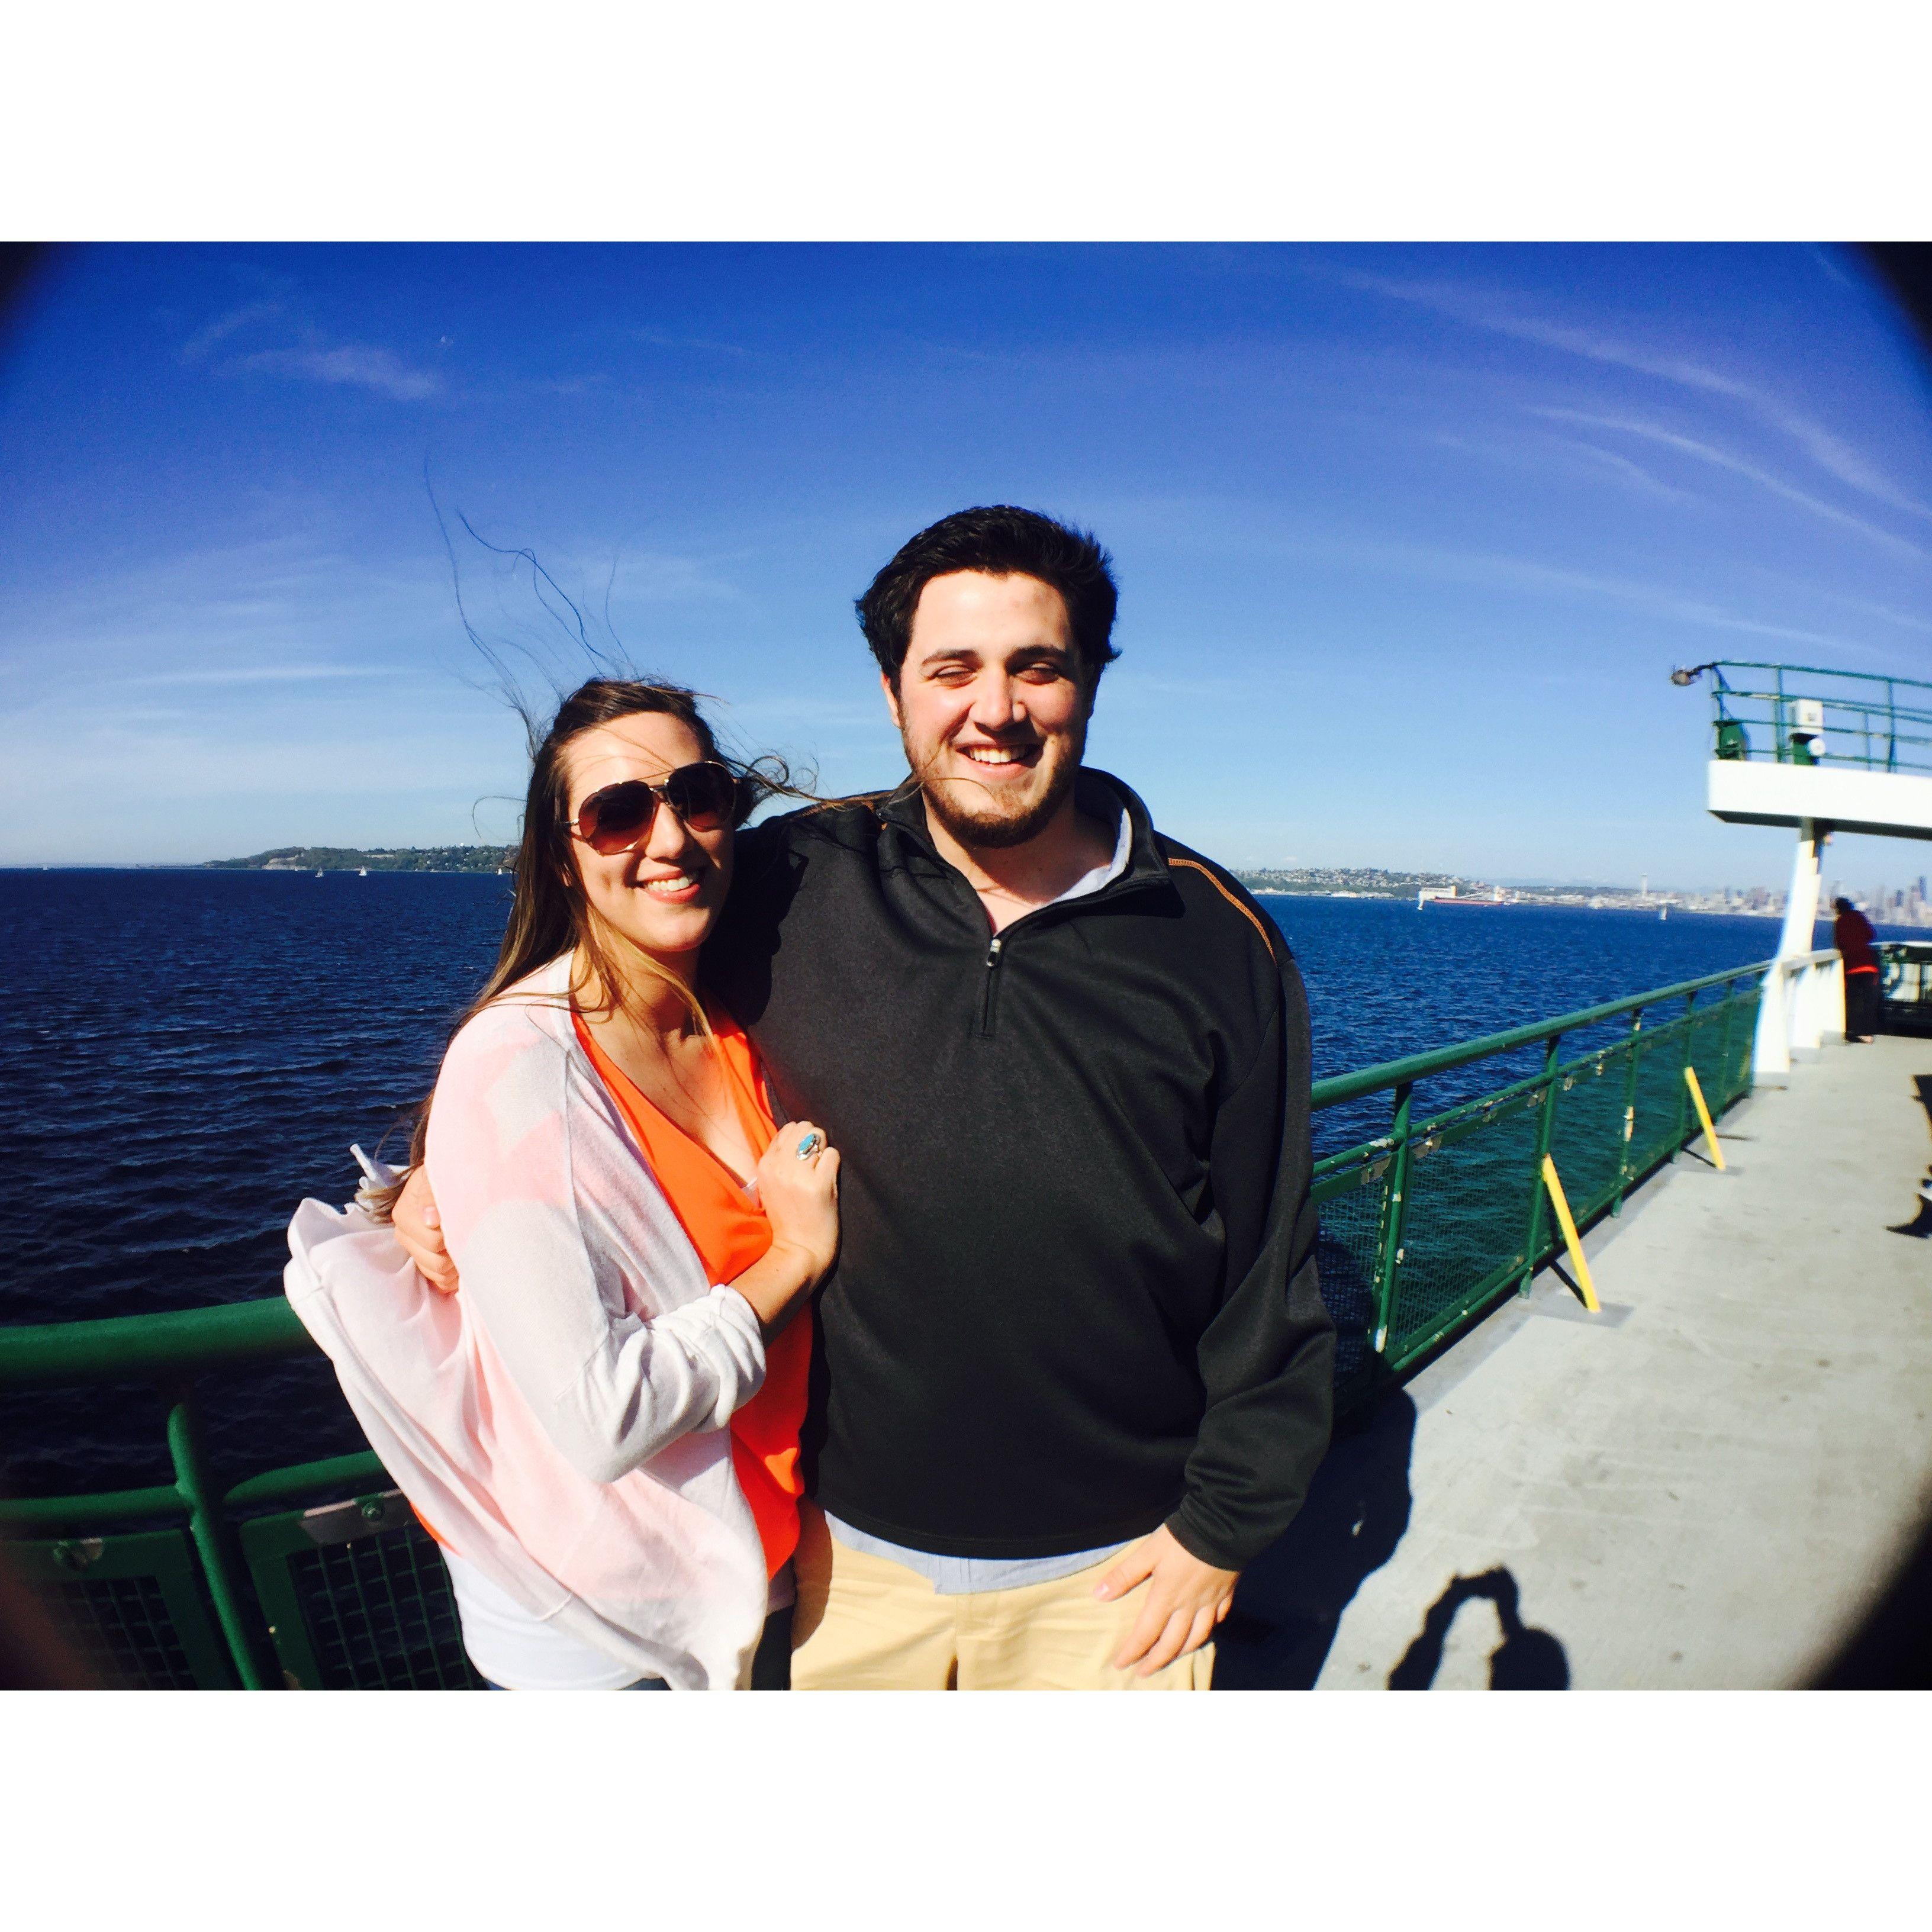 Our first photo together - Seattle-Bainbridge Ferry - April 2015